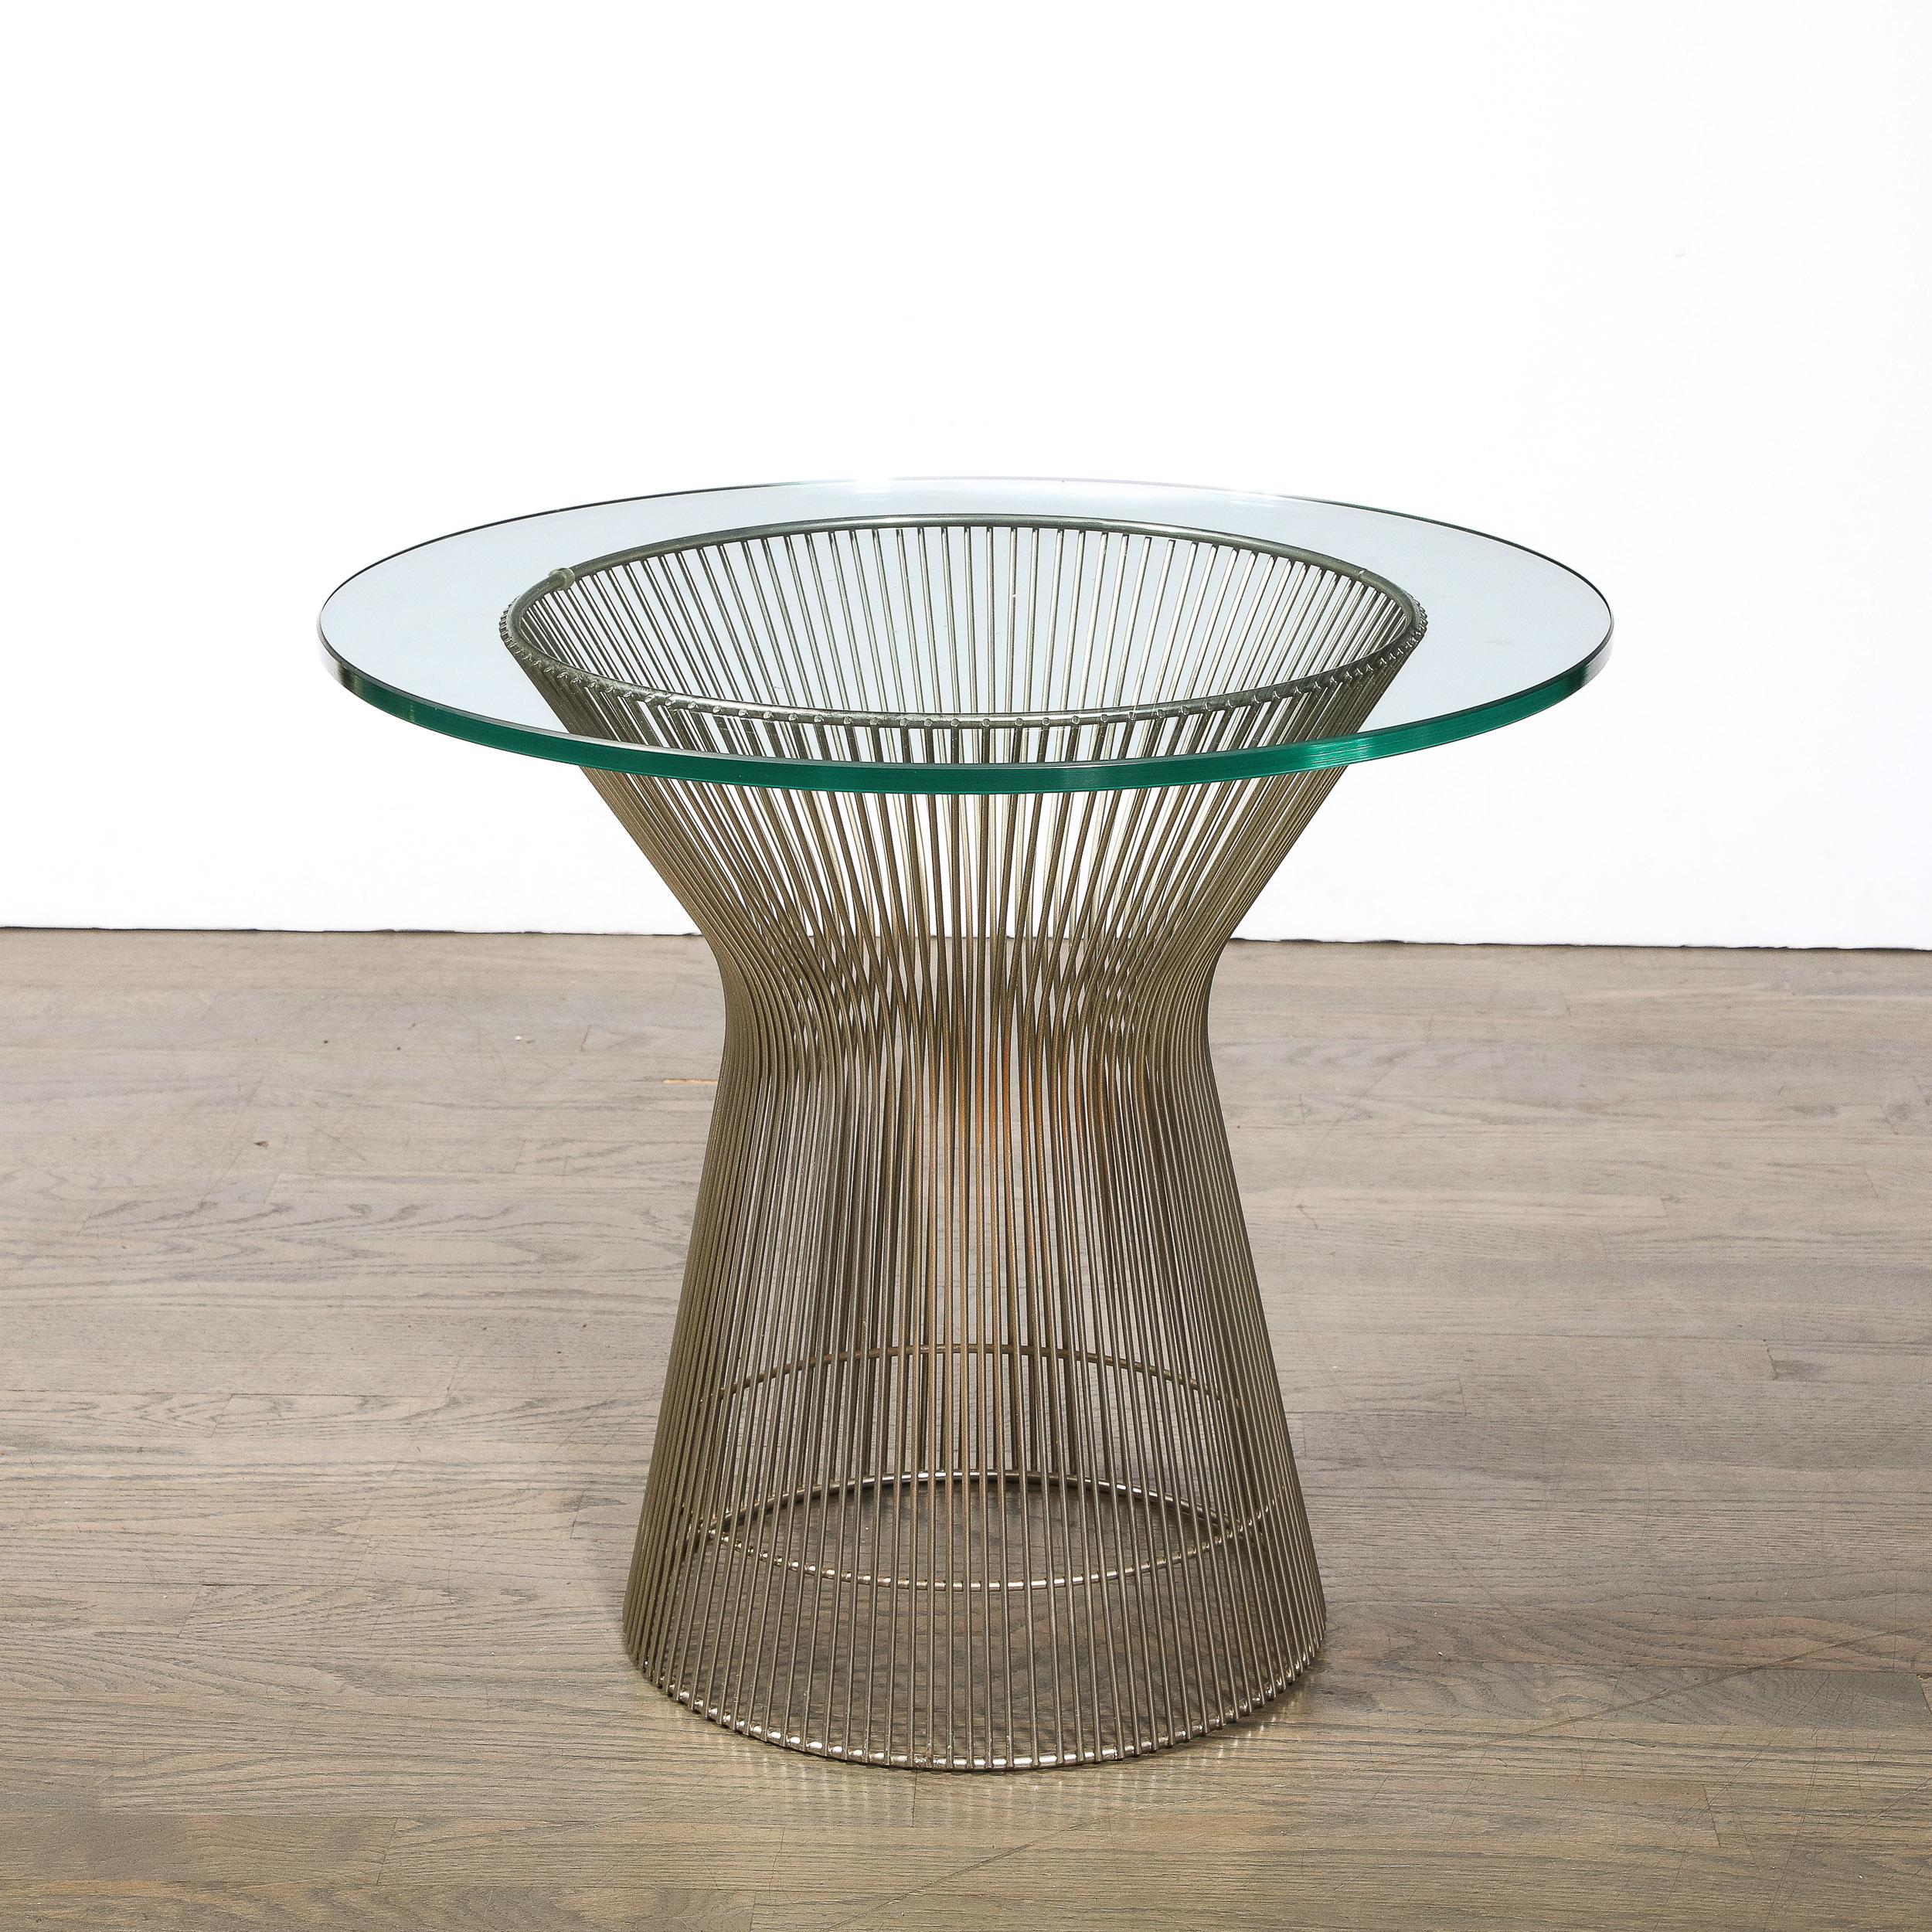 American Pair of Mid-Century Modernist Polished Nickel Side Tables by Warren Platner For Sale